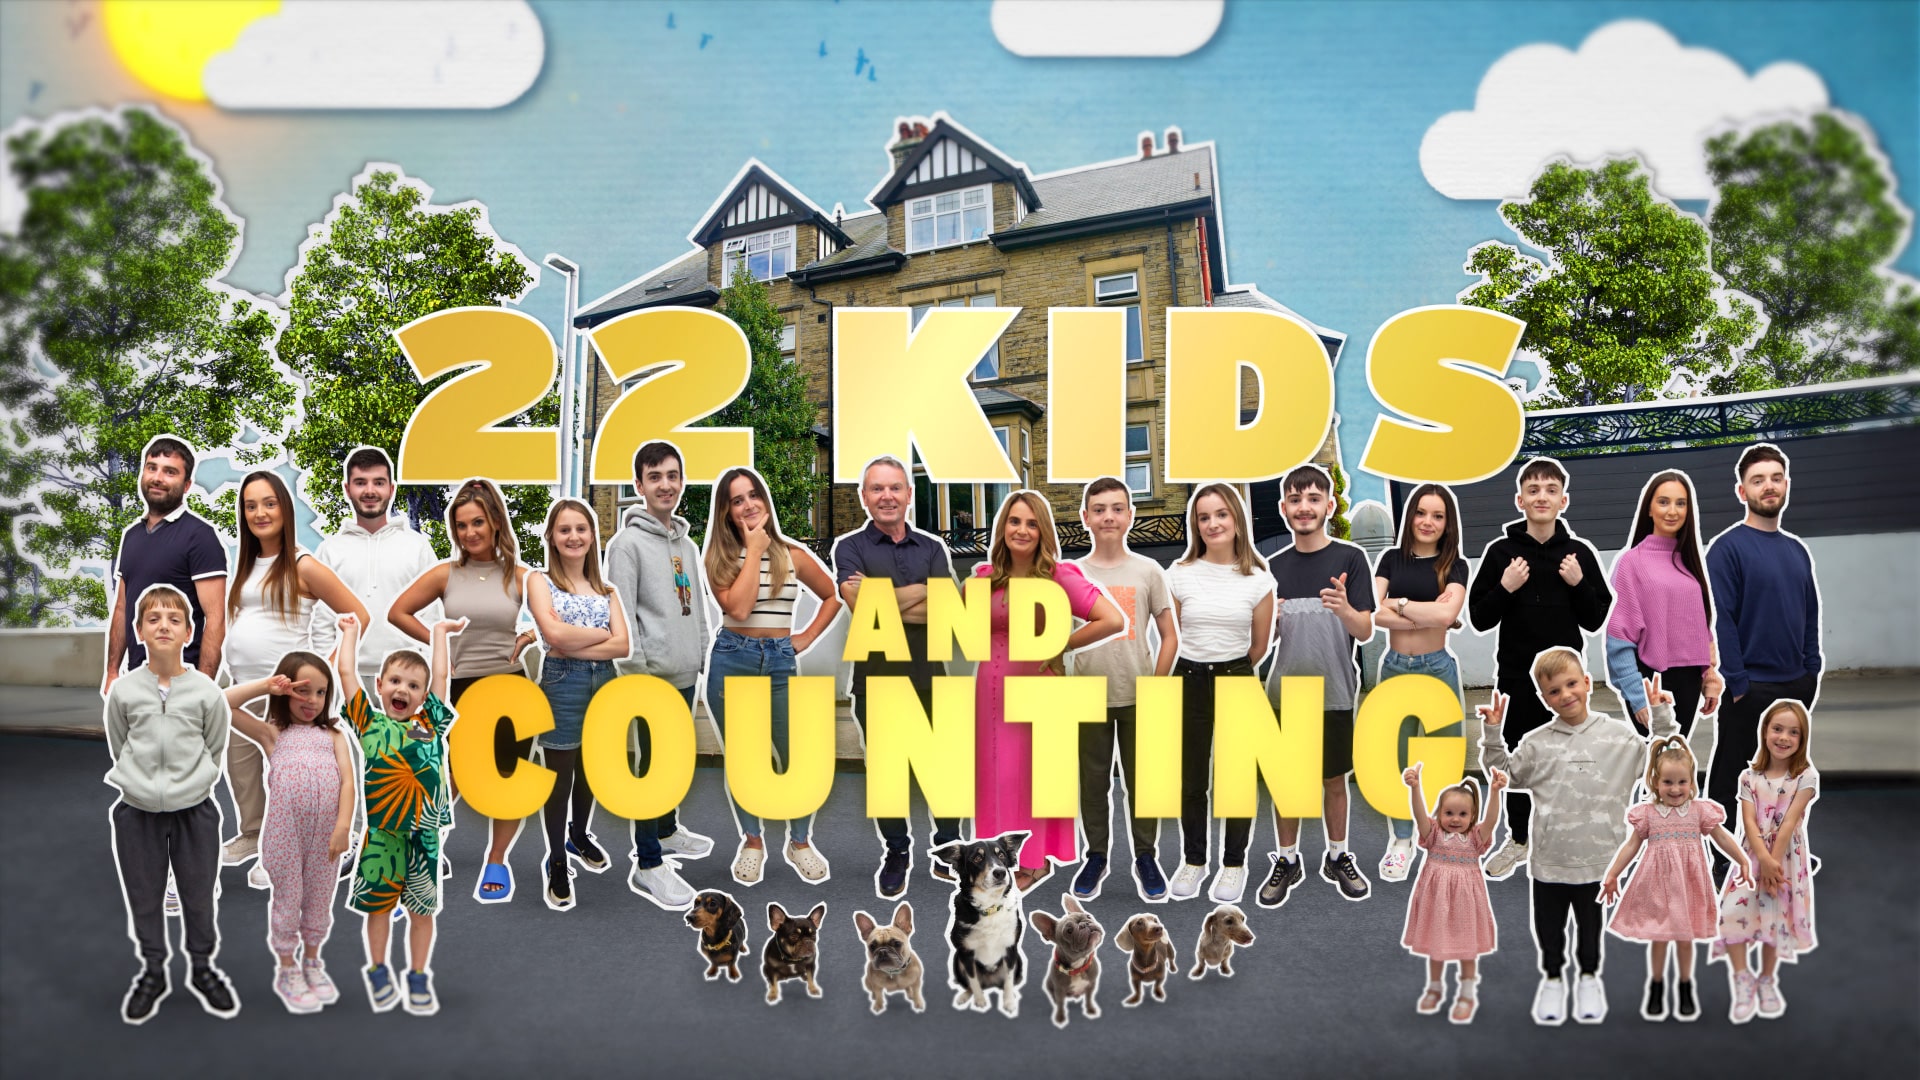 Britain’s biggest family are back….. 22 Kids and Counting returns to Channel 5 on Sunday 21st July at 8pm